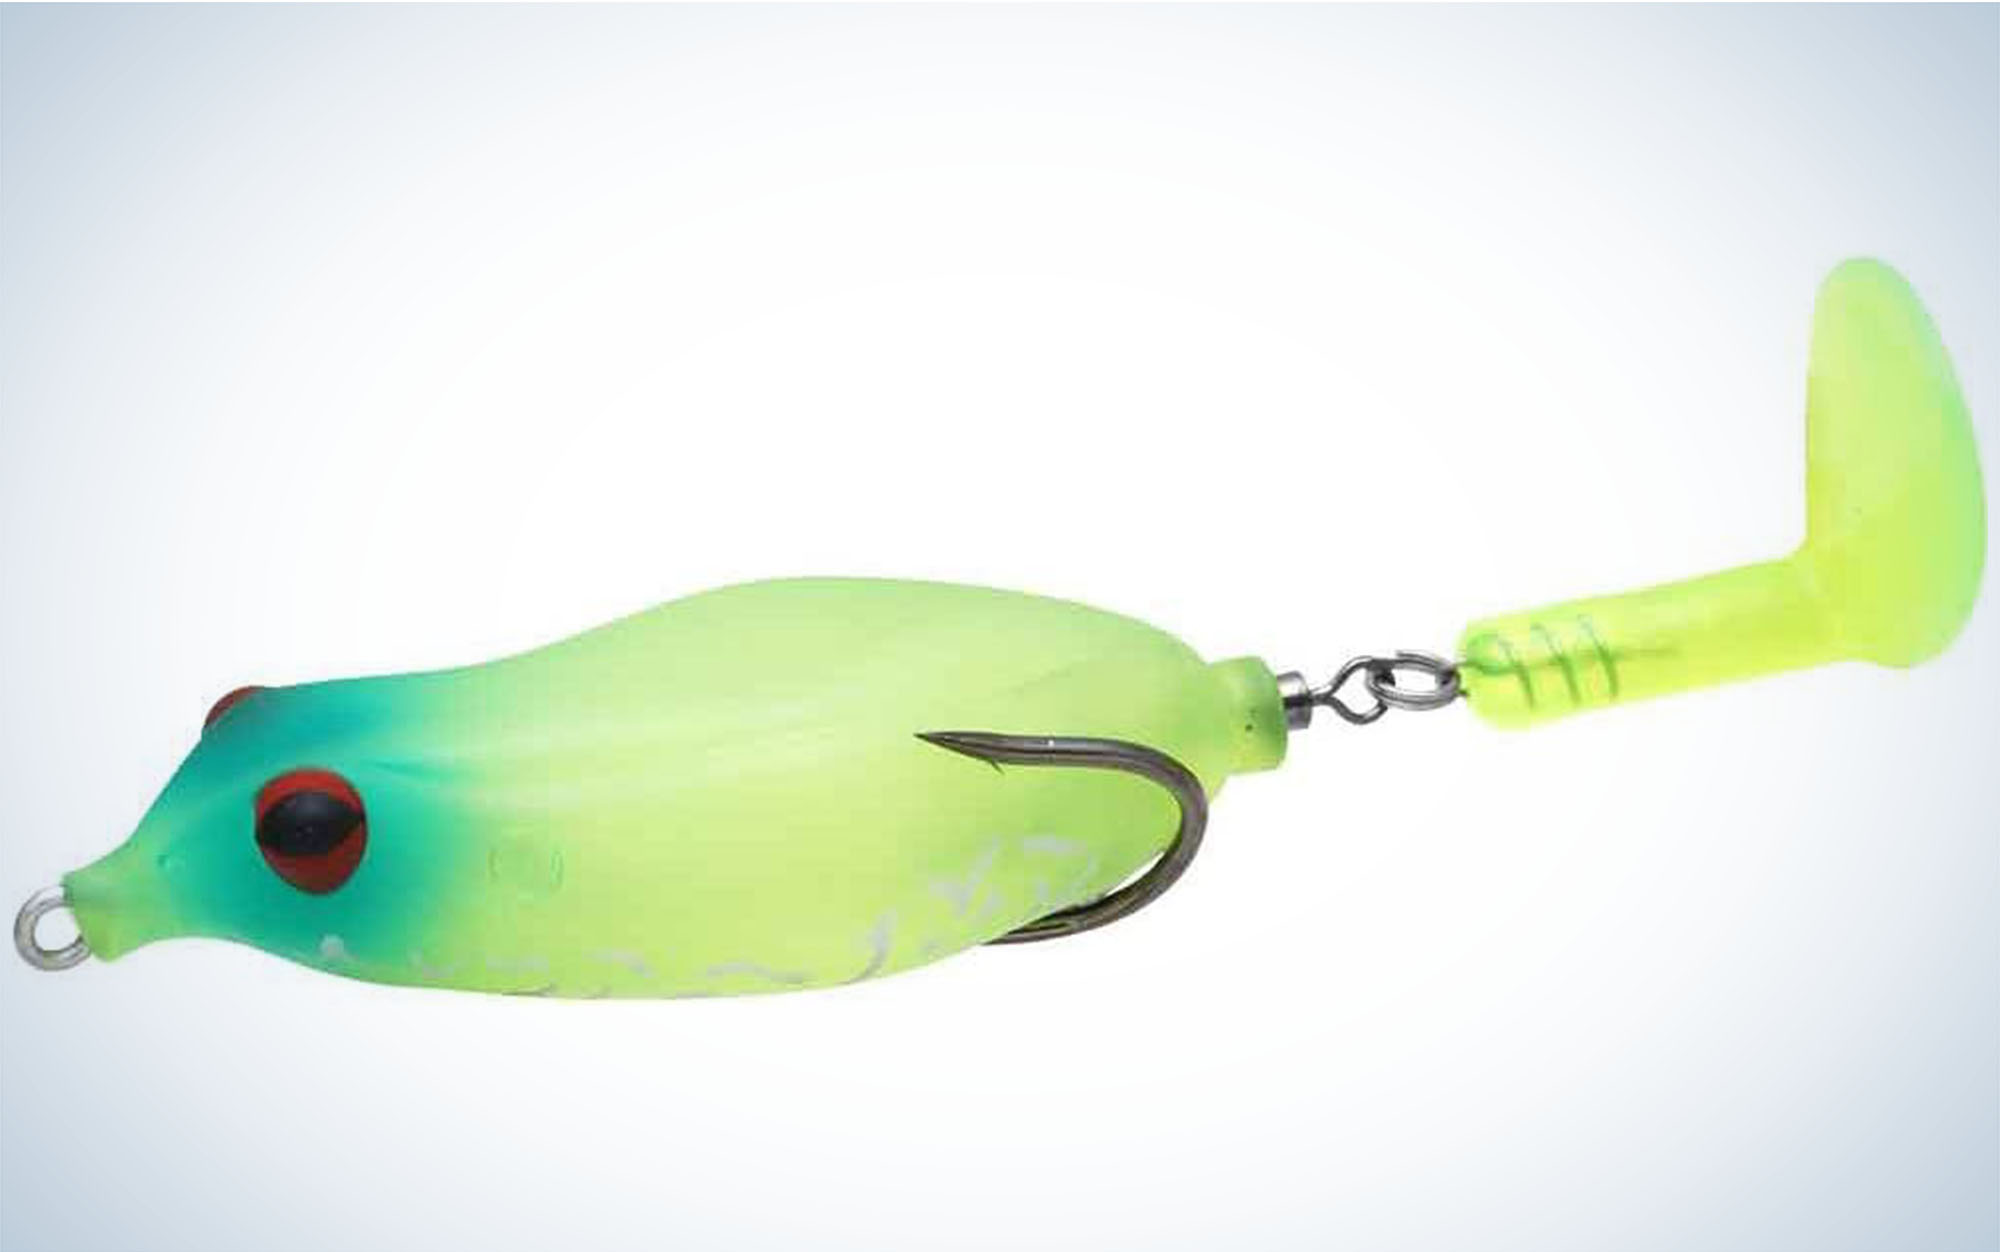 The Five Best Fishing Lures of All Time